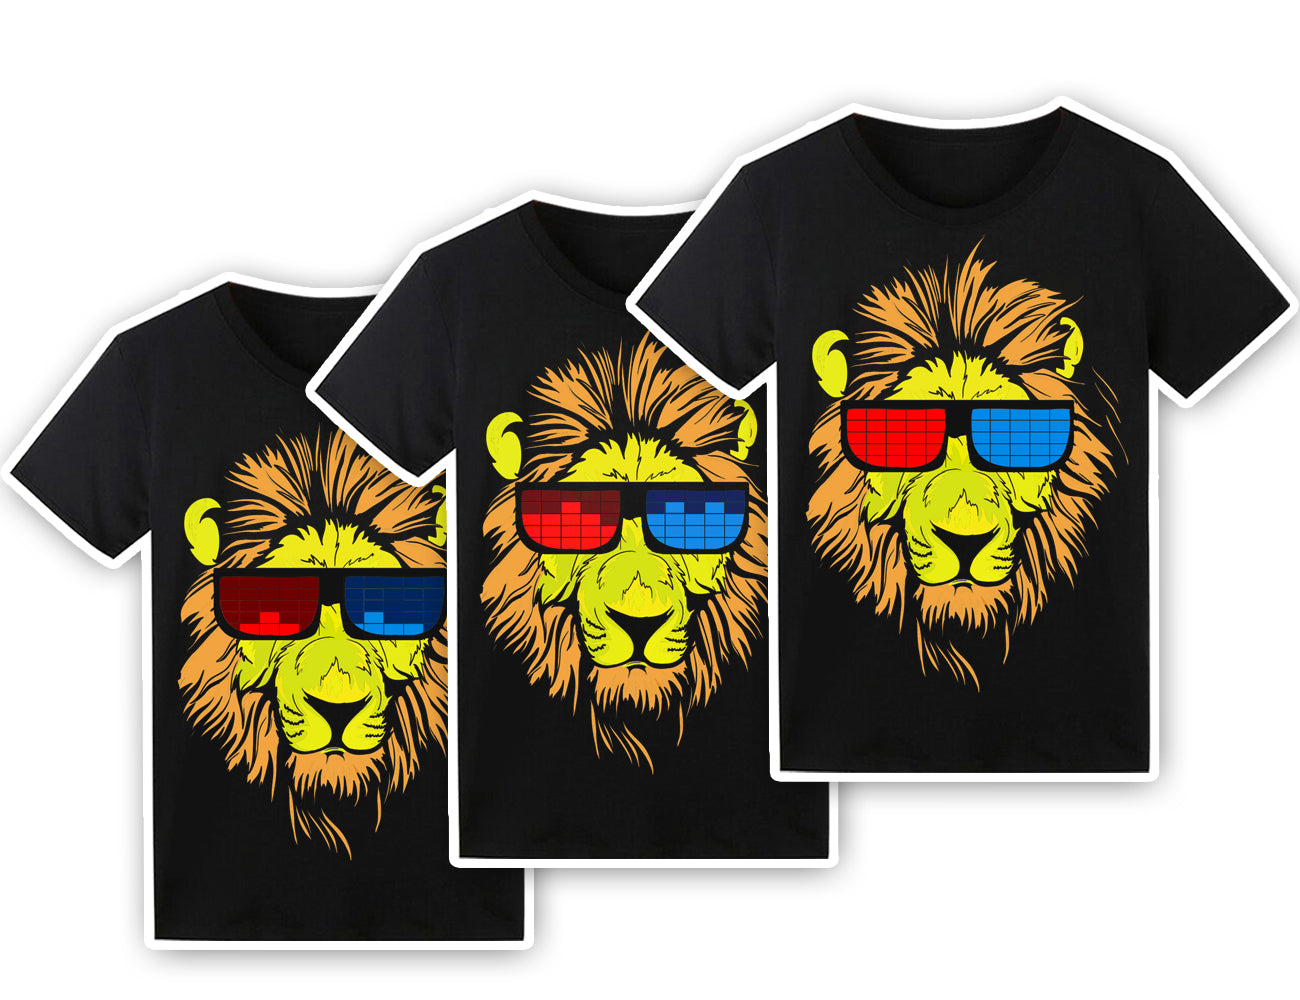 LED T Shirt Sound Activated Glow Shirts Light up Equalizer Clothes for Party(Lion)